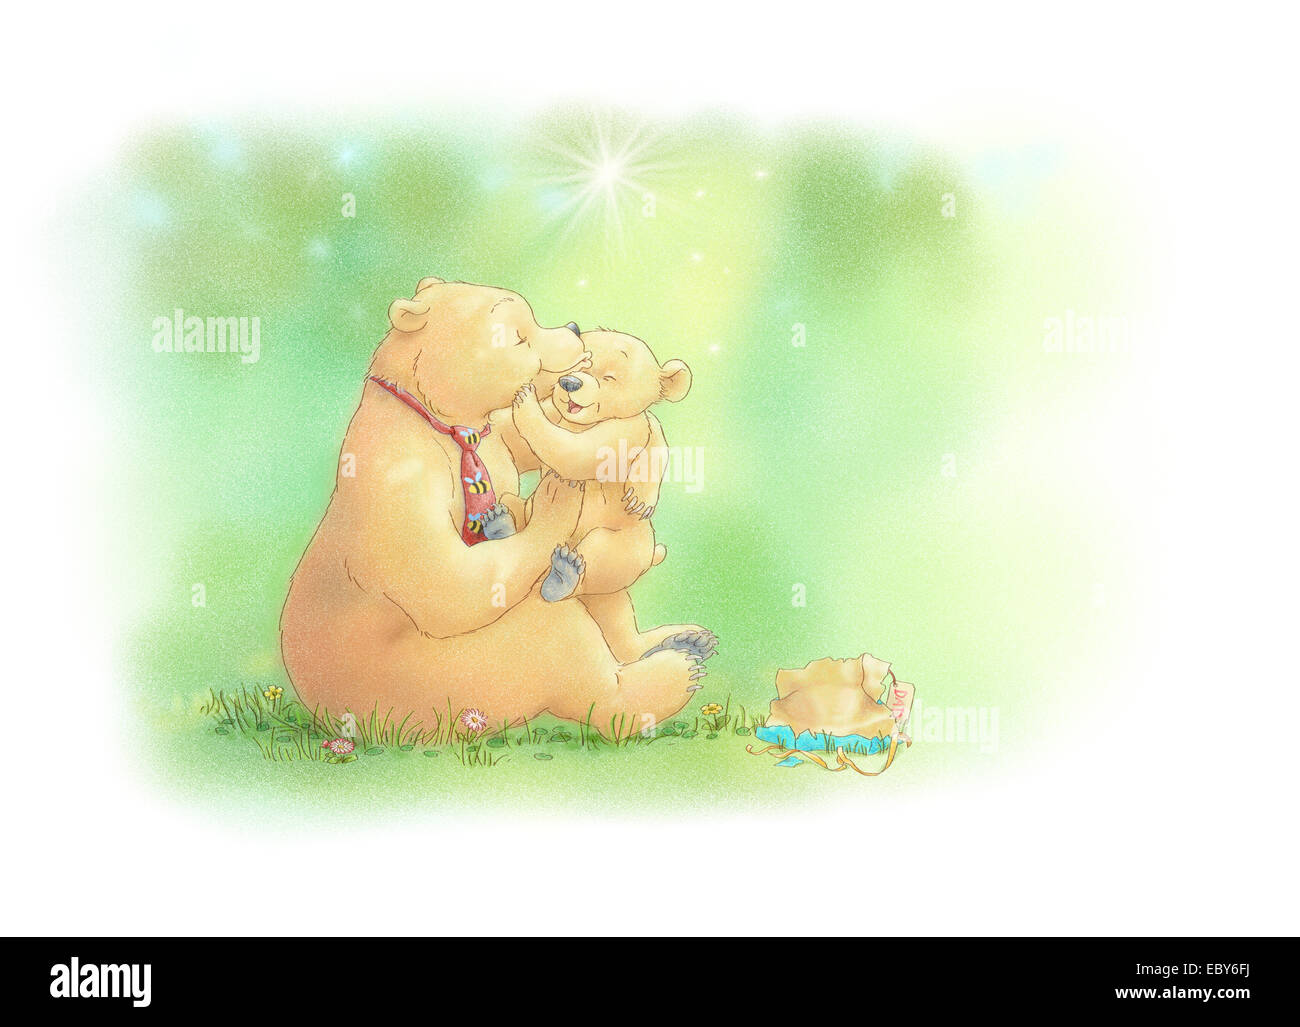 Illustration of a bear cub giving its present on father's day. Stock Photo